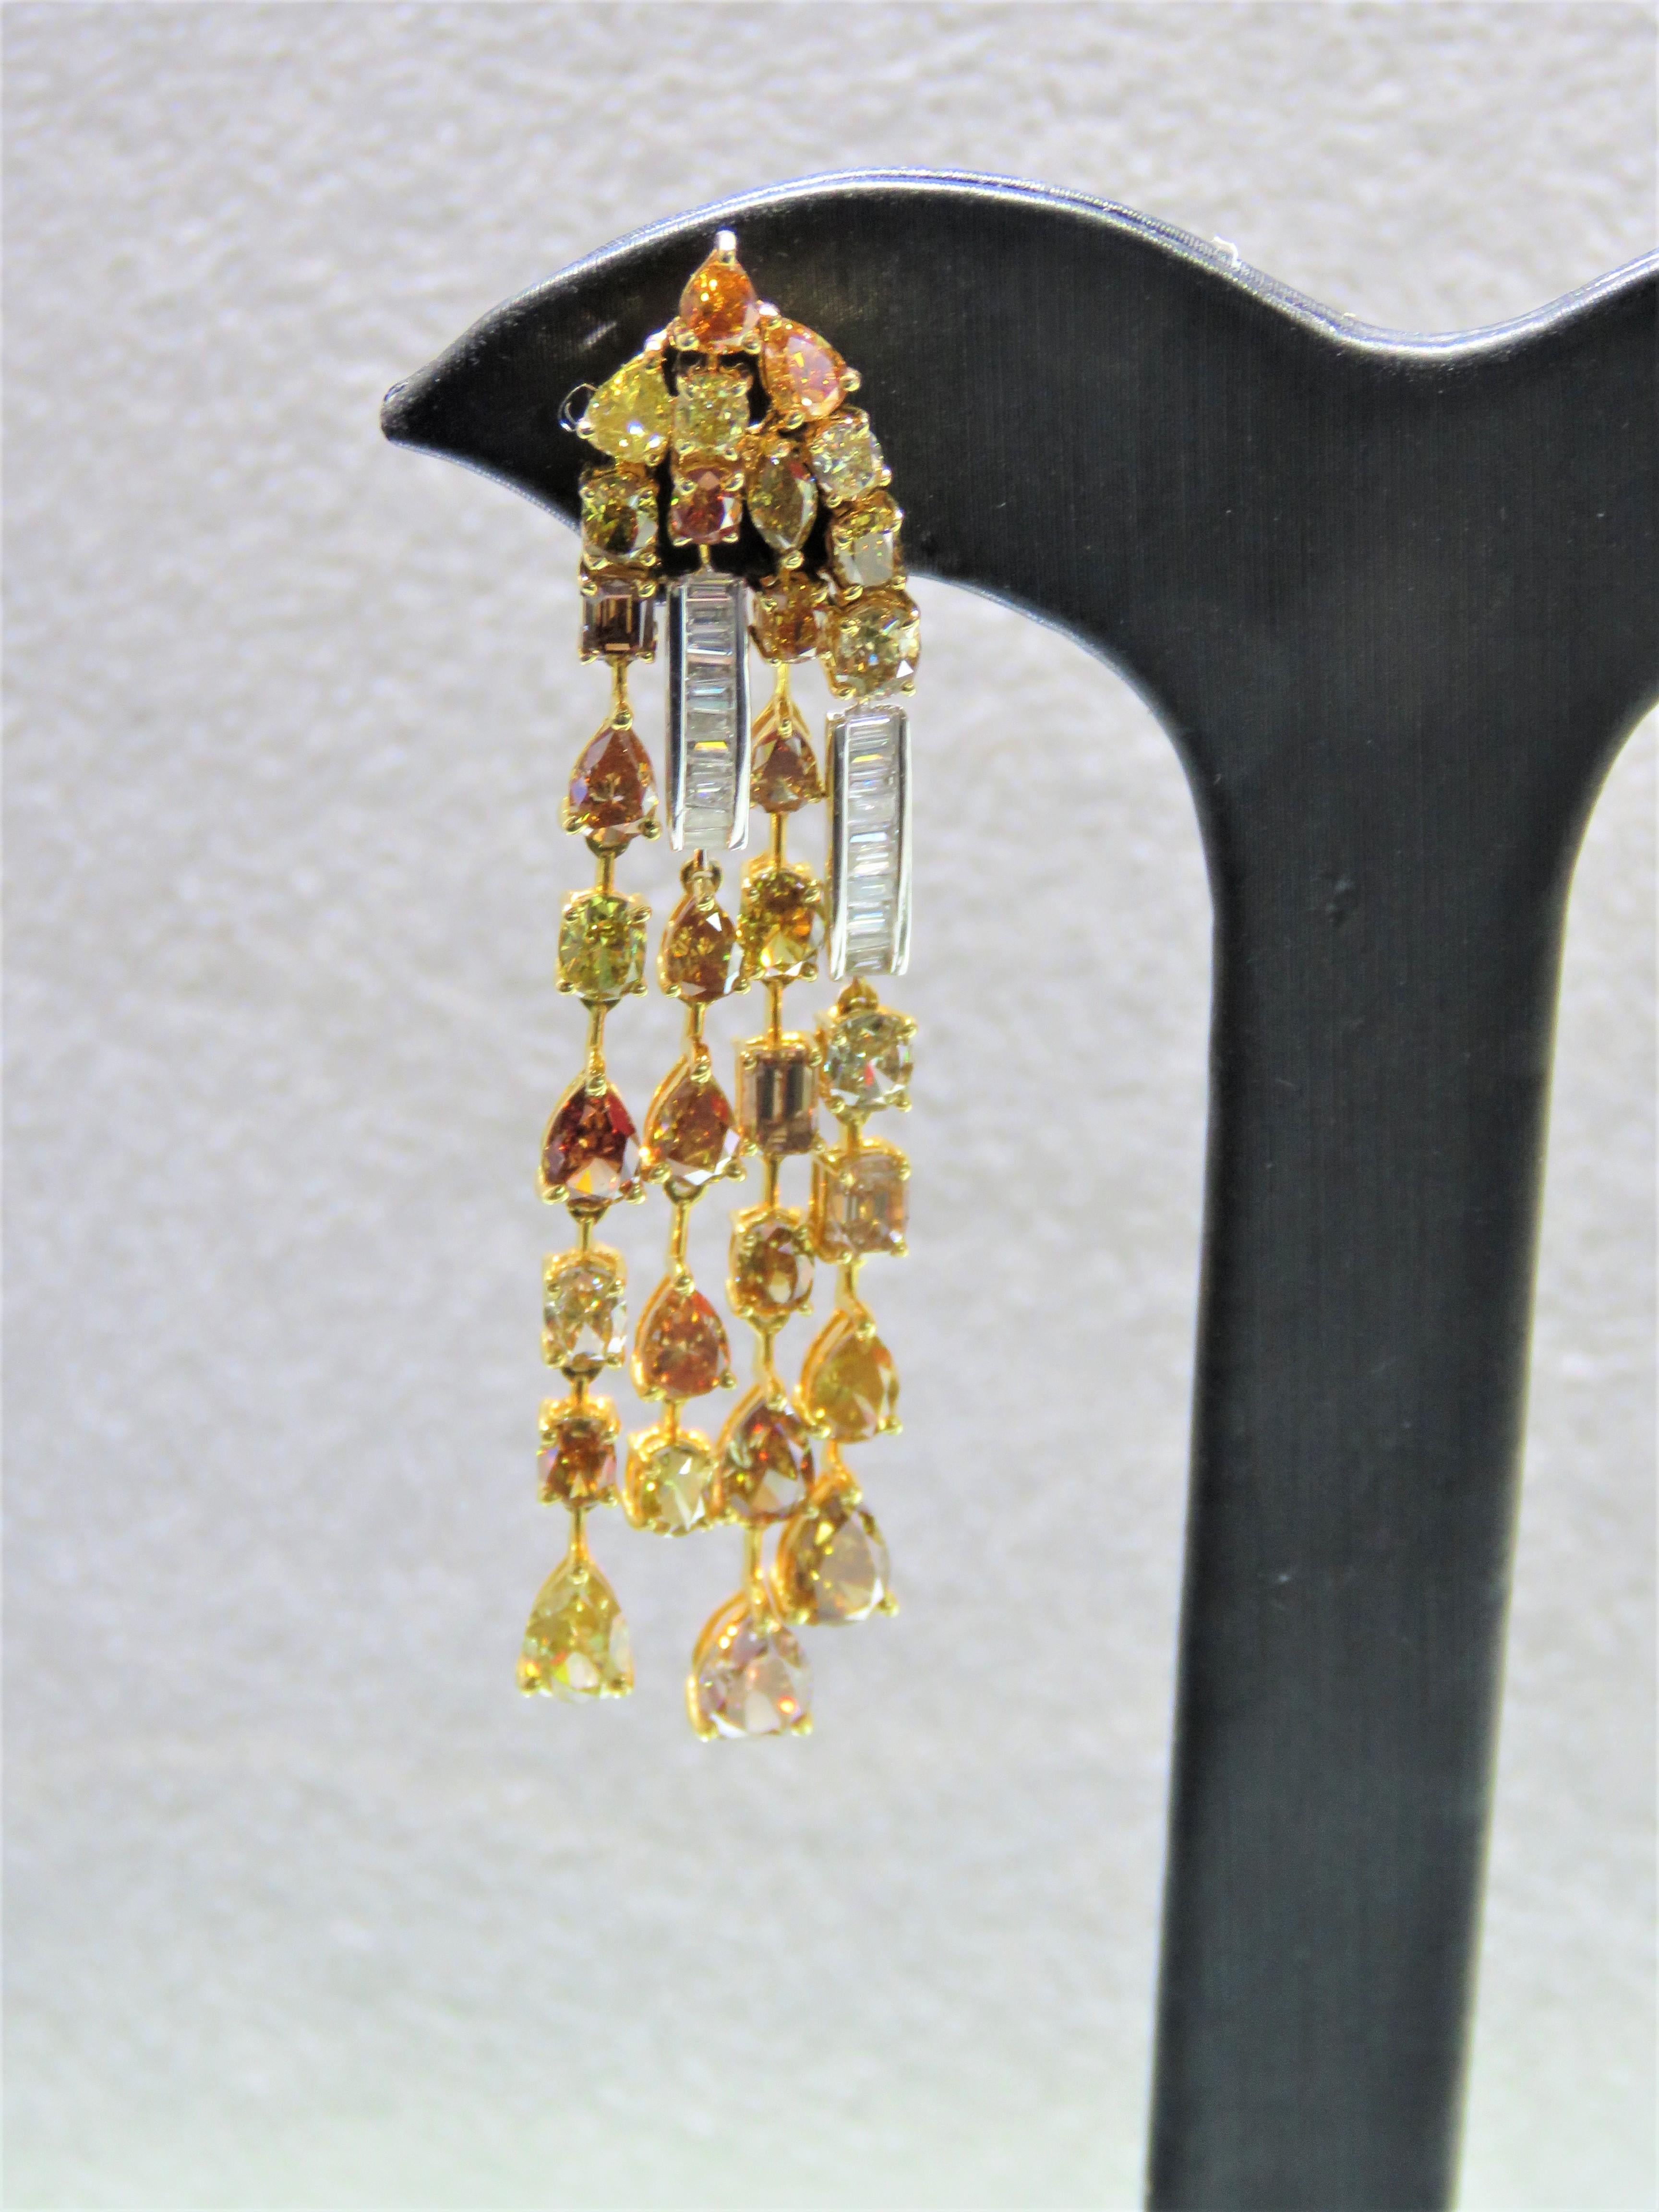 The Following Item we are offering are these Extremely Rare Beautiful 18KT Gold Fine Large Fancy Yellow and White Diamond Dangle Earrings. Each Earring features Rare Gorgeous Glittering Fancy Large Yellow, Cognac, and Orange Diamonds Draping with